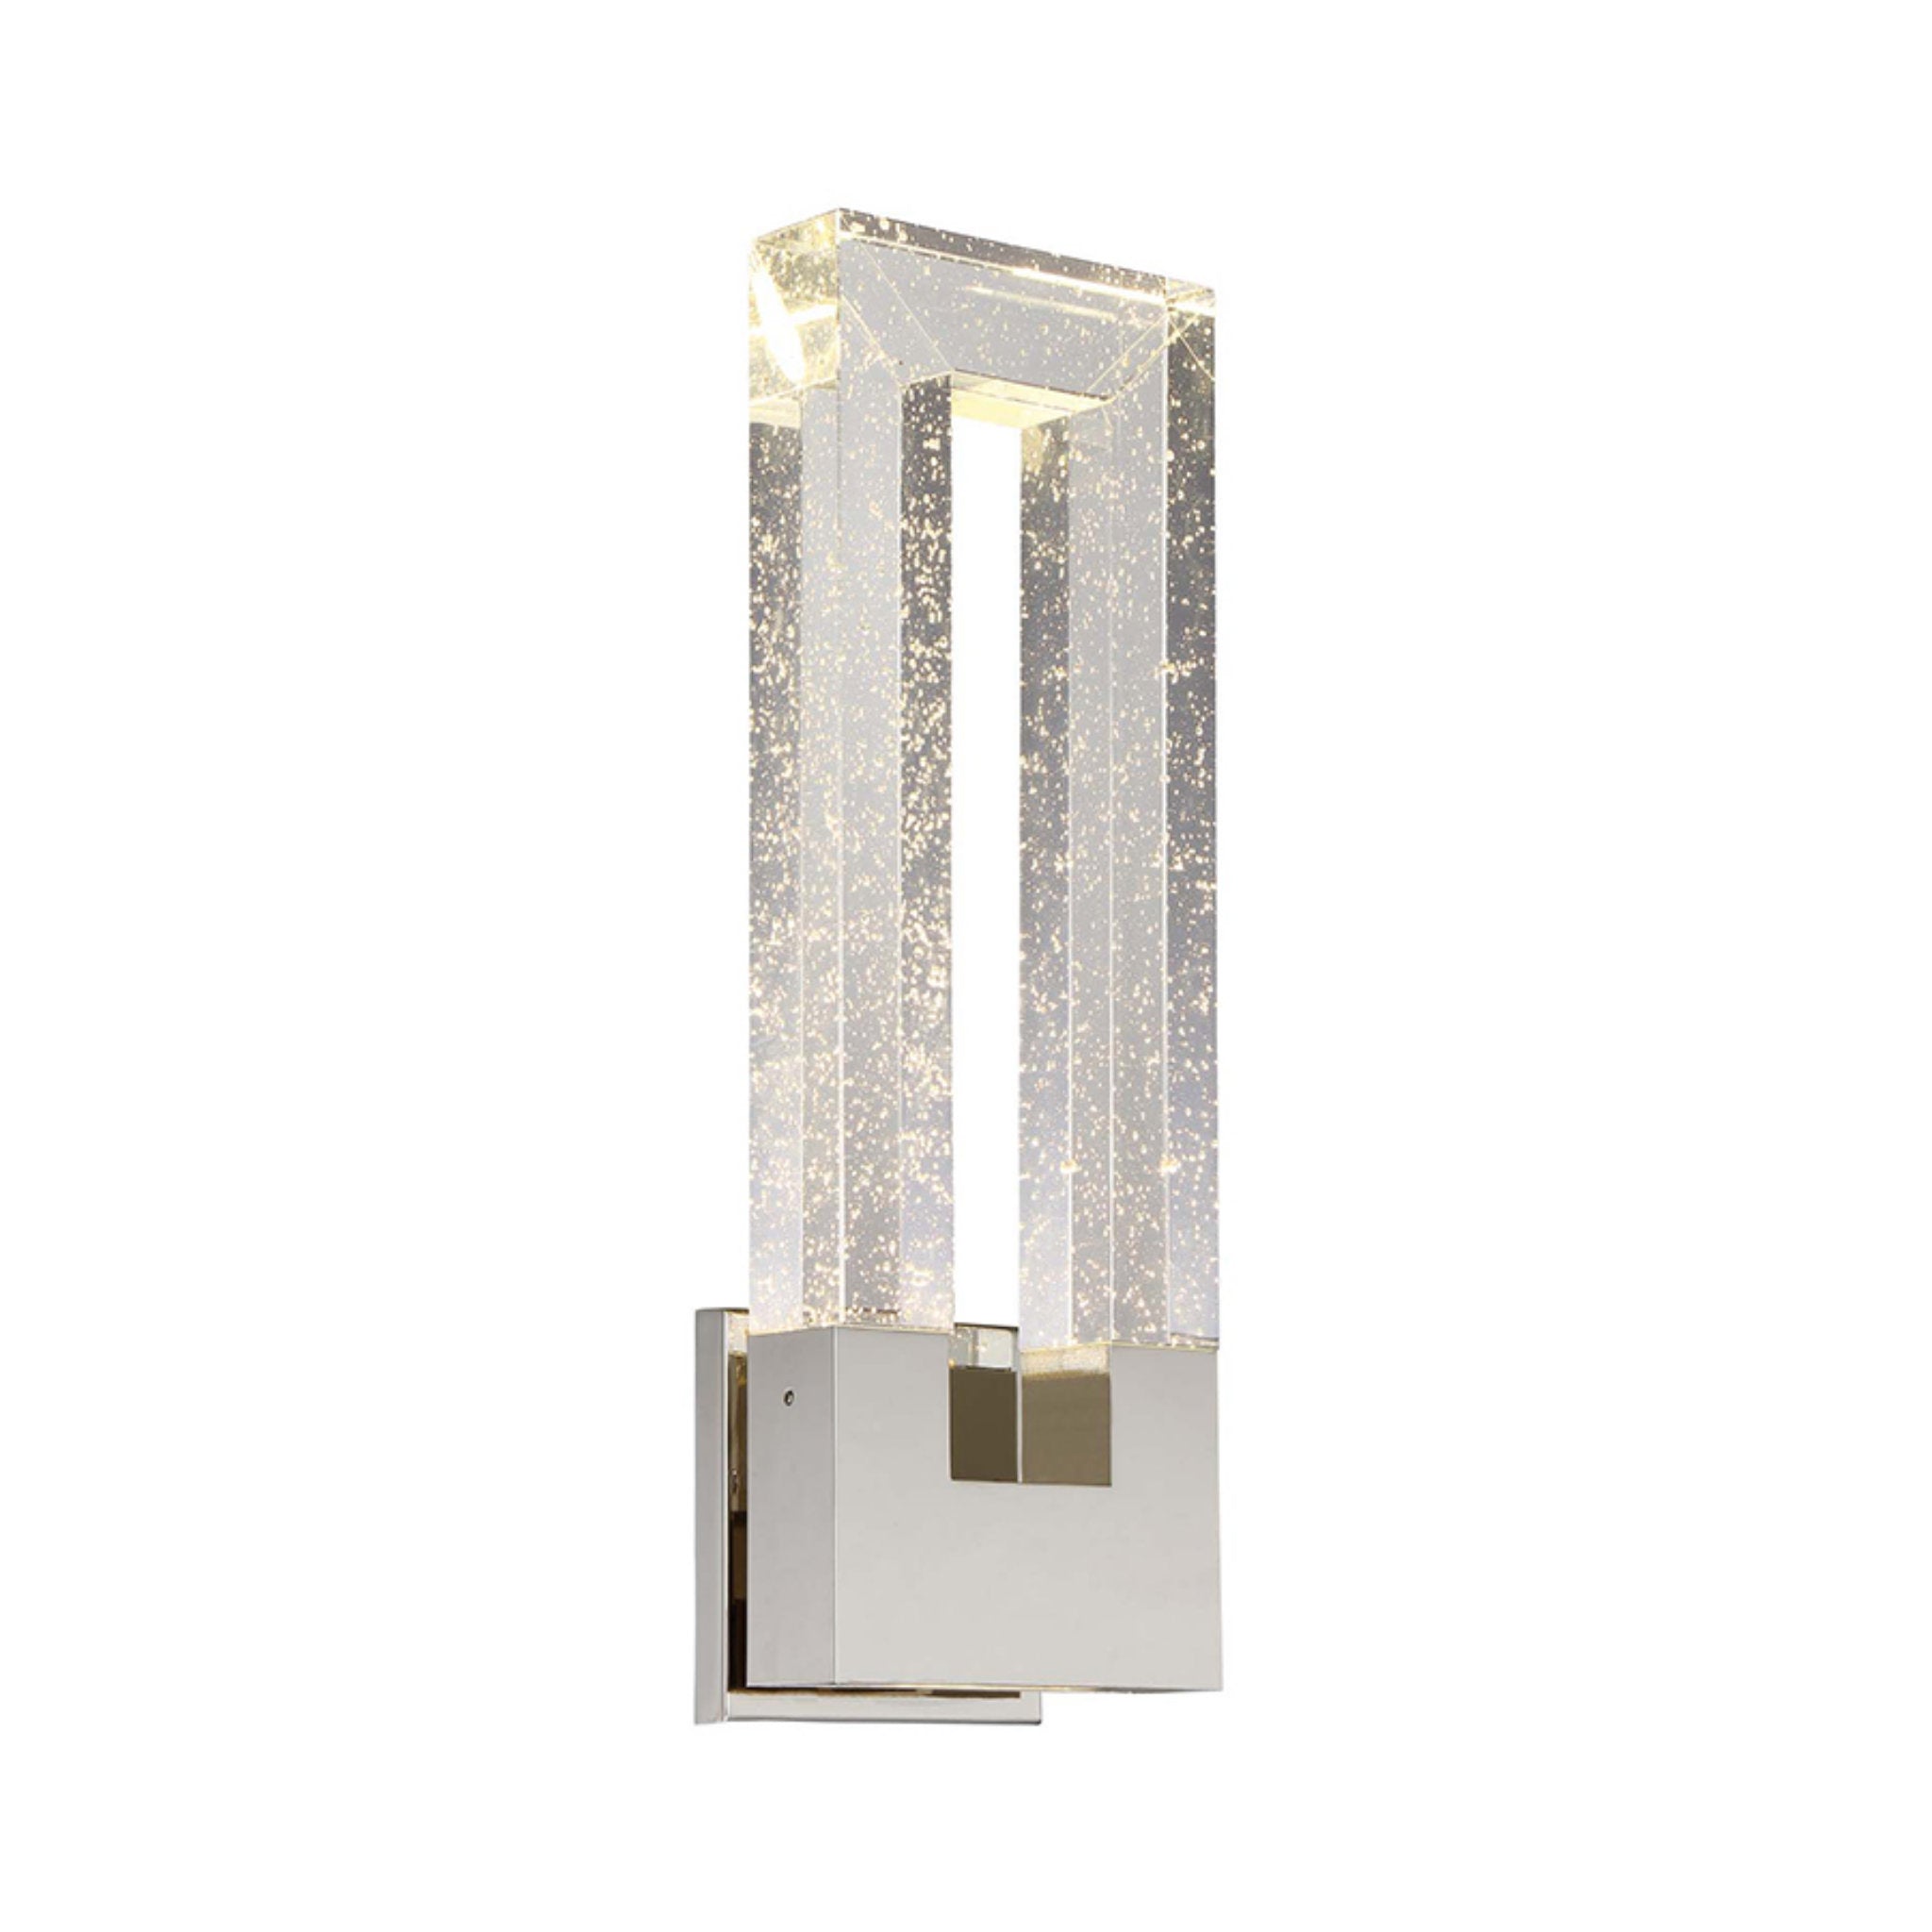 Modern Forms WS-31618-PN 3000K 20 Watt Chill LED Wall Sconce in Polished Nickel